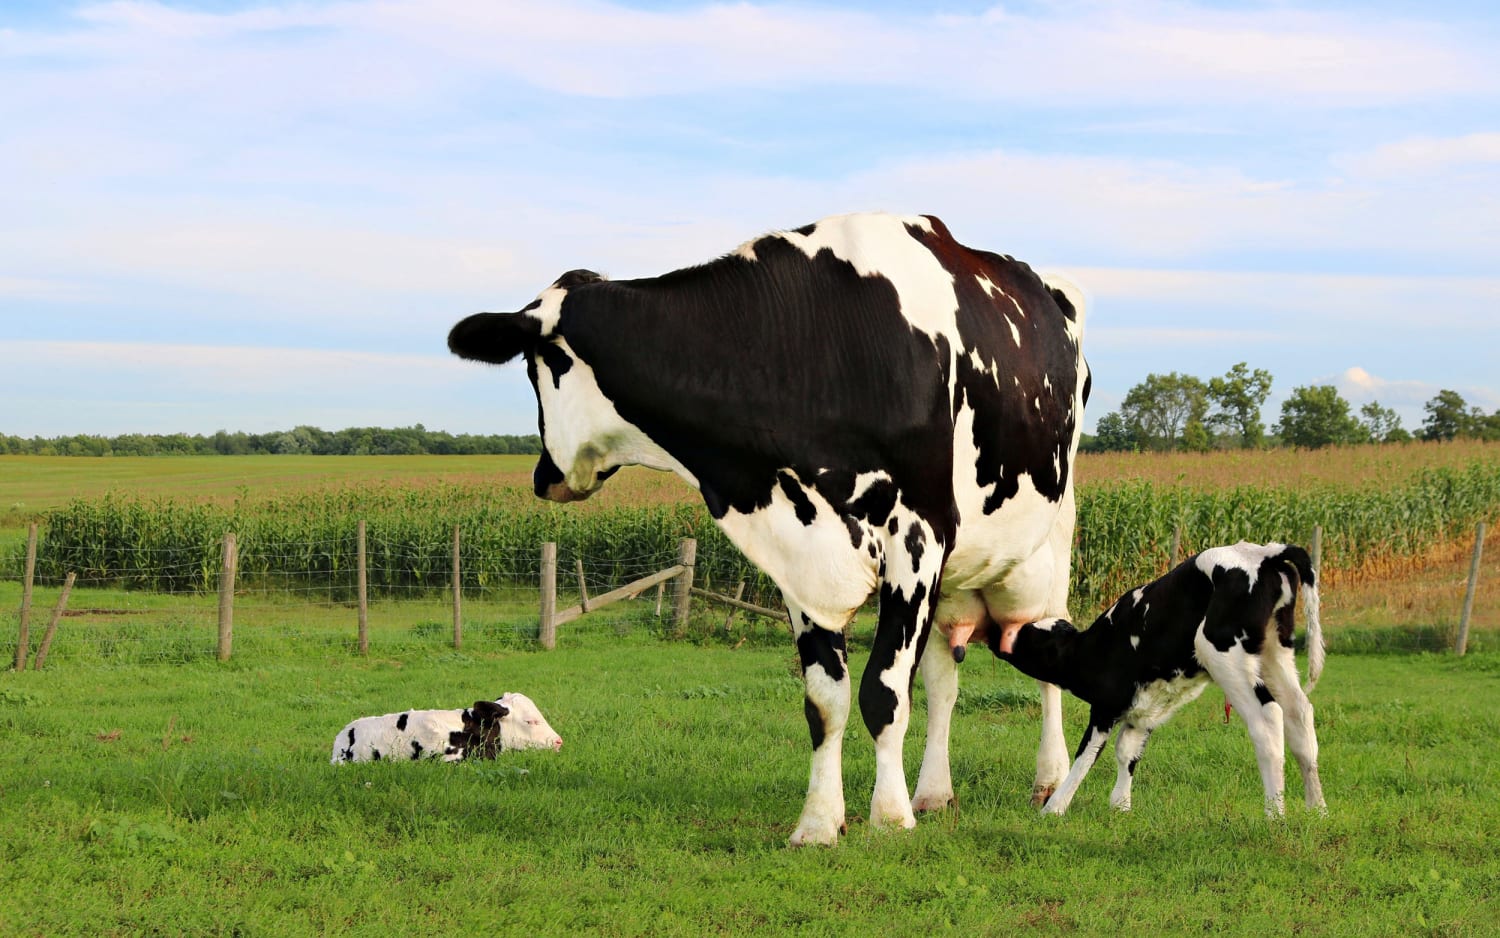 Bovine colostrum is going viral for its benefits for digestion, skin and more. Does it work?